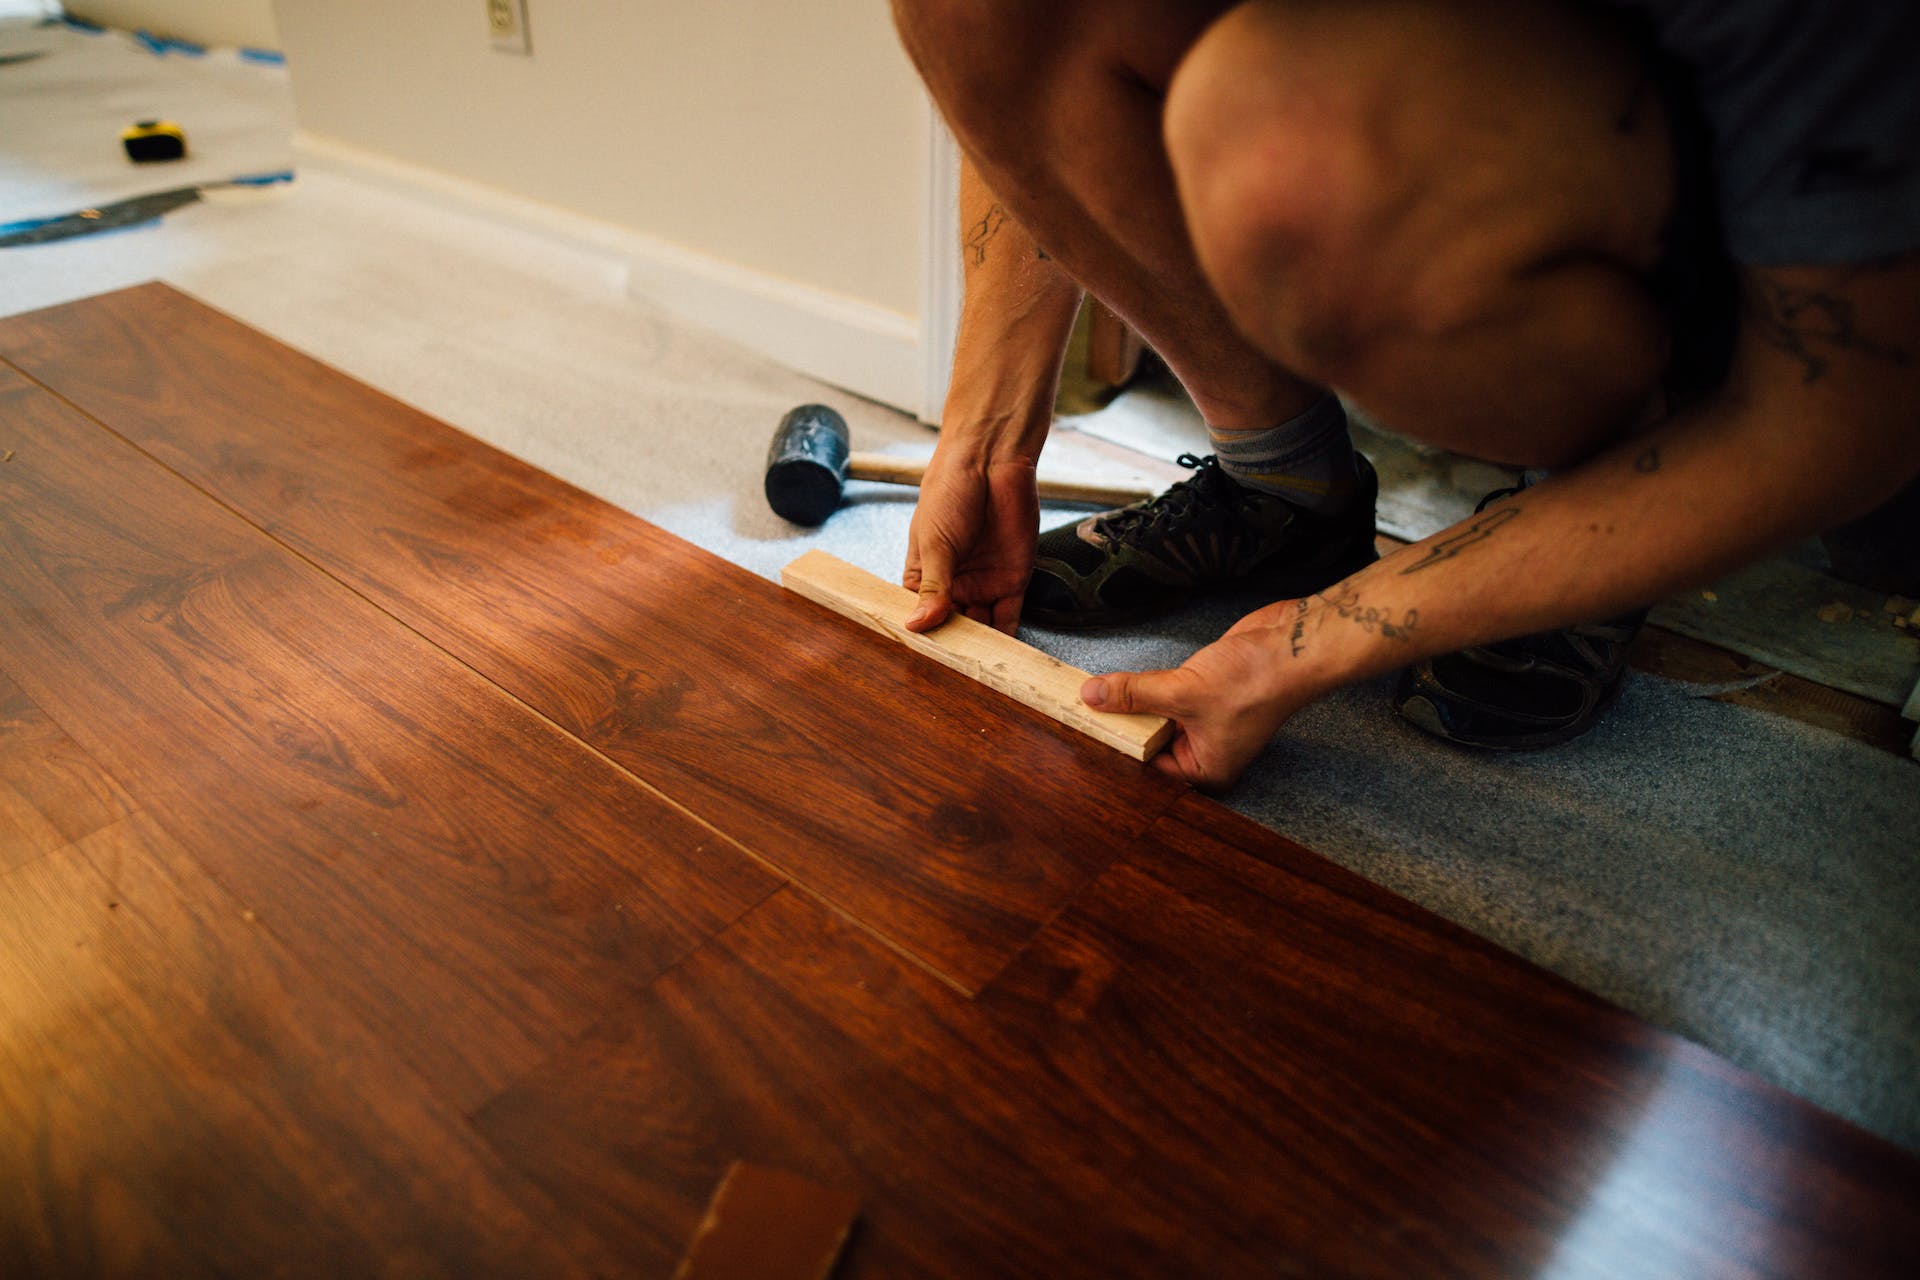 A man busy installing laminate flooring with a wood look to it